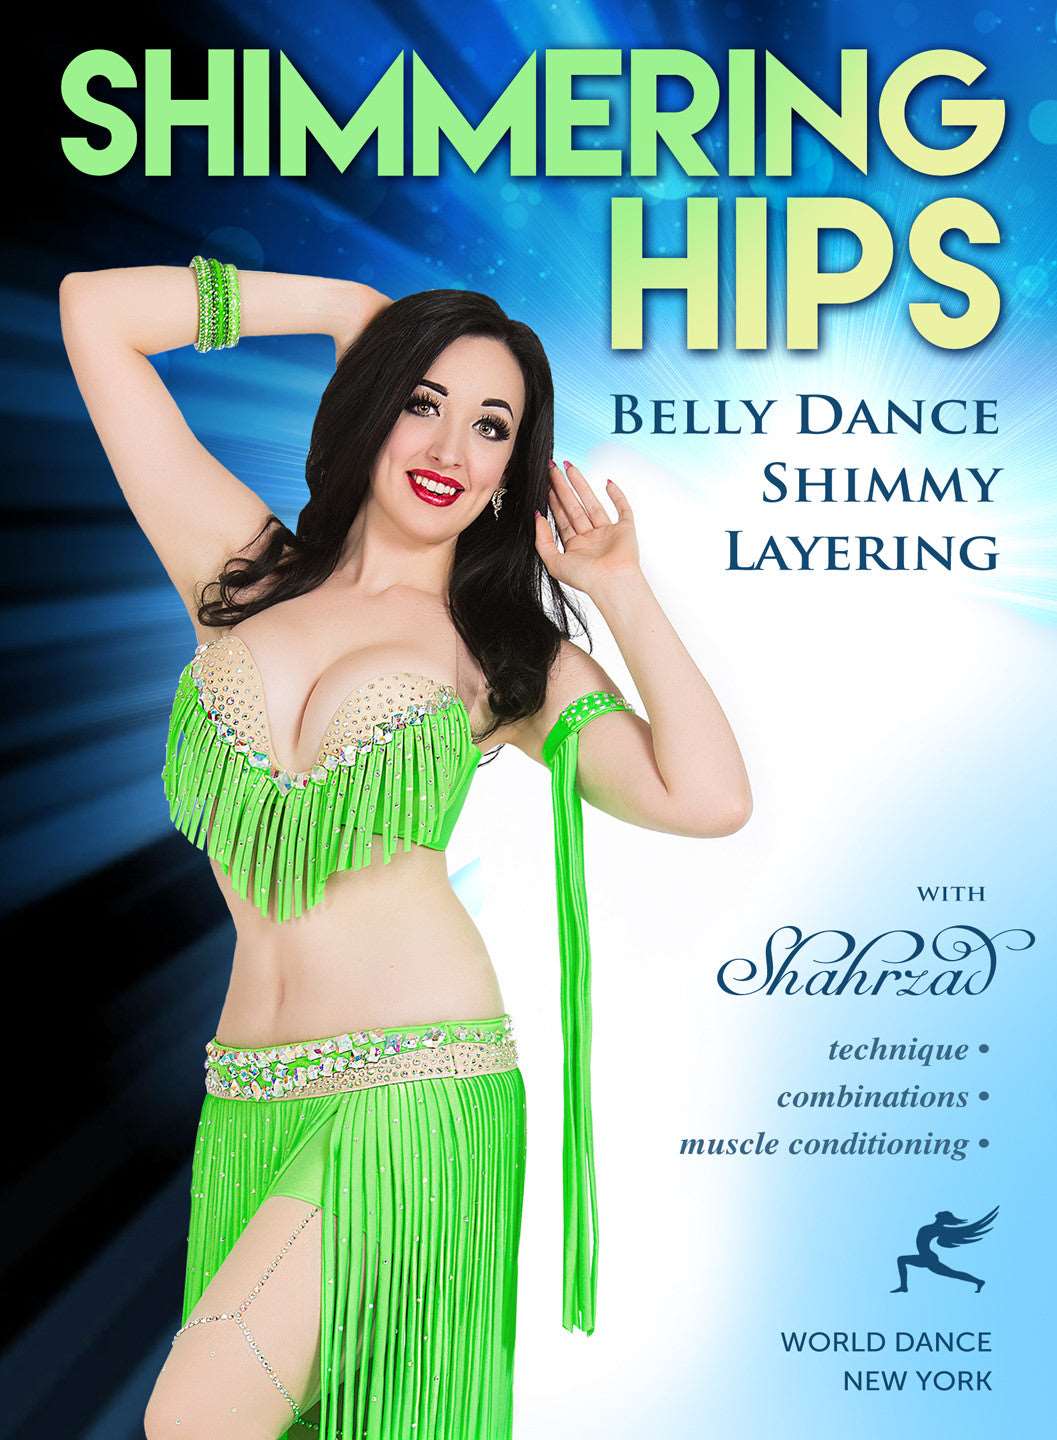 "Shimmering Hips - Belly Dance Shimmy Layering" DVD with Shahrzad - World Dance New York